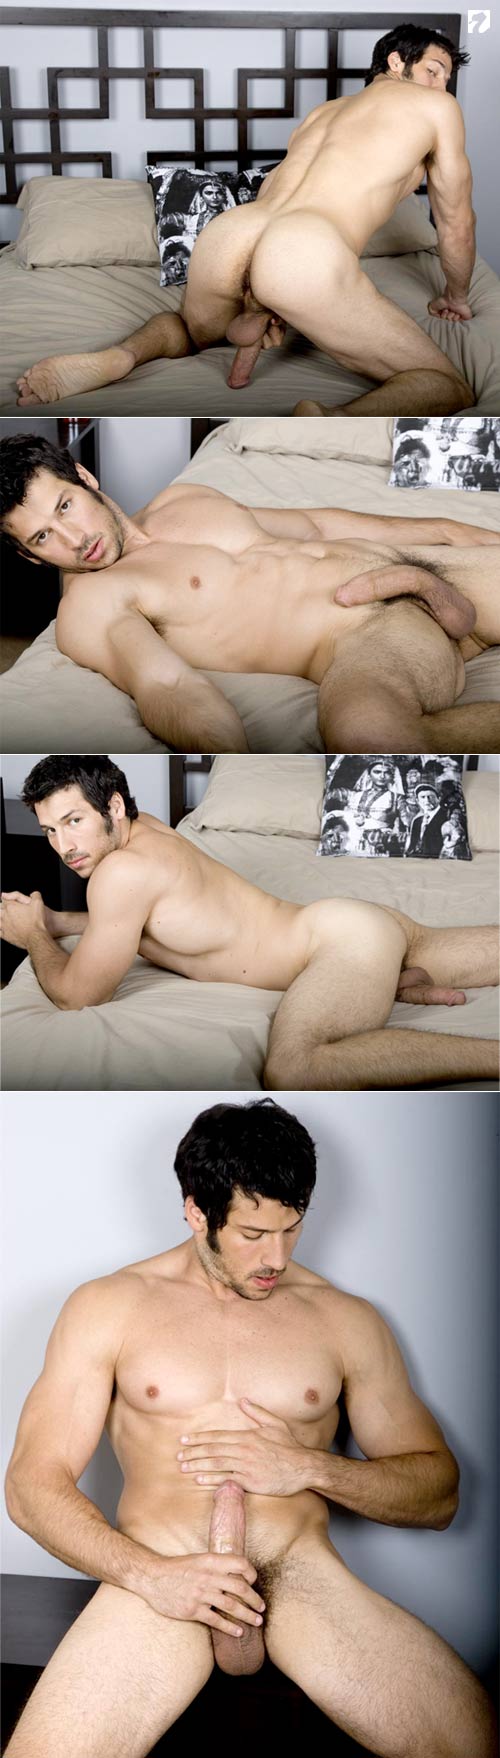 Leo Giamani Hot Tasty Morsel Of The Day